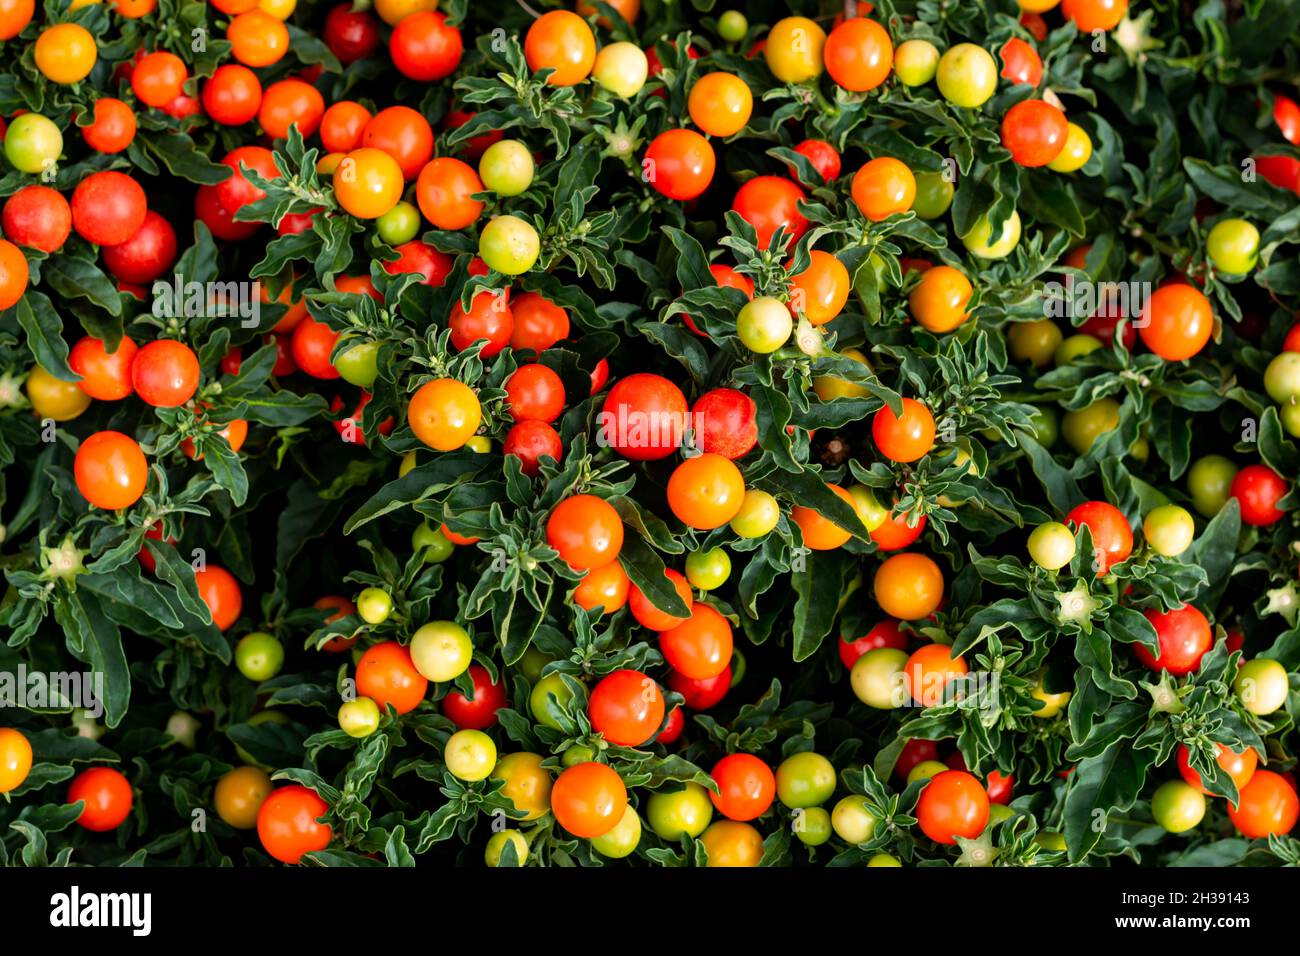 Solanum Pseudocapsicum Or Winter Cherry Plant Or Jerusalem Cherry Ornamental Plant For Christmas With Bright Red Berries Stock Photo Alamy